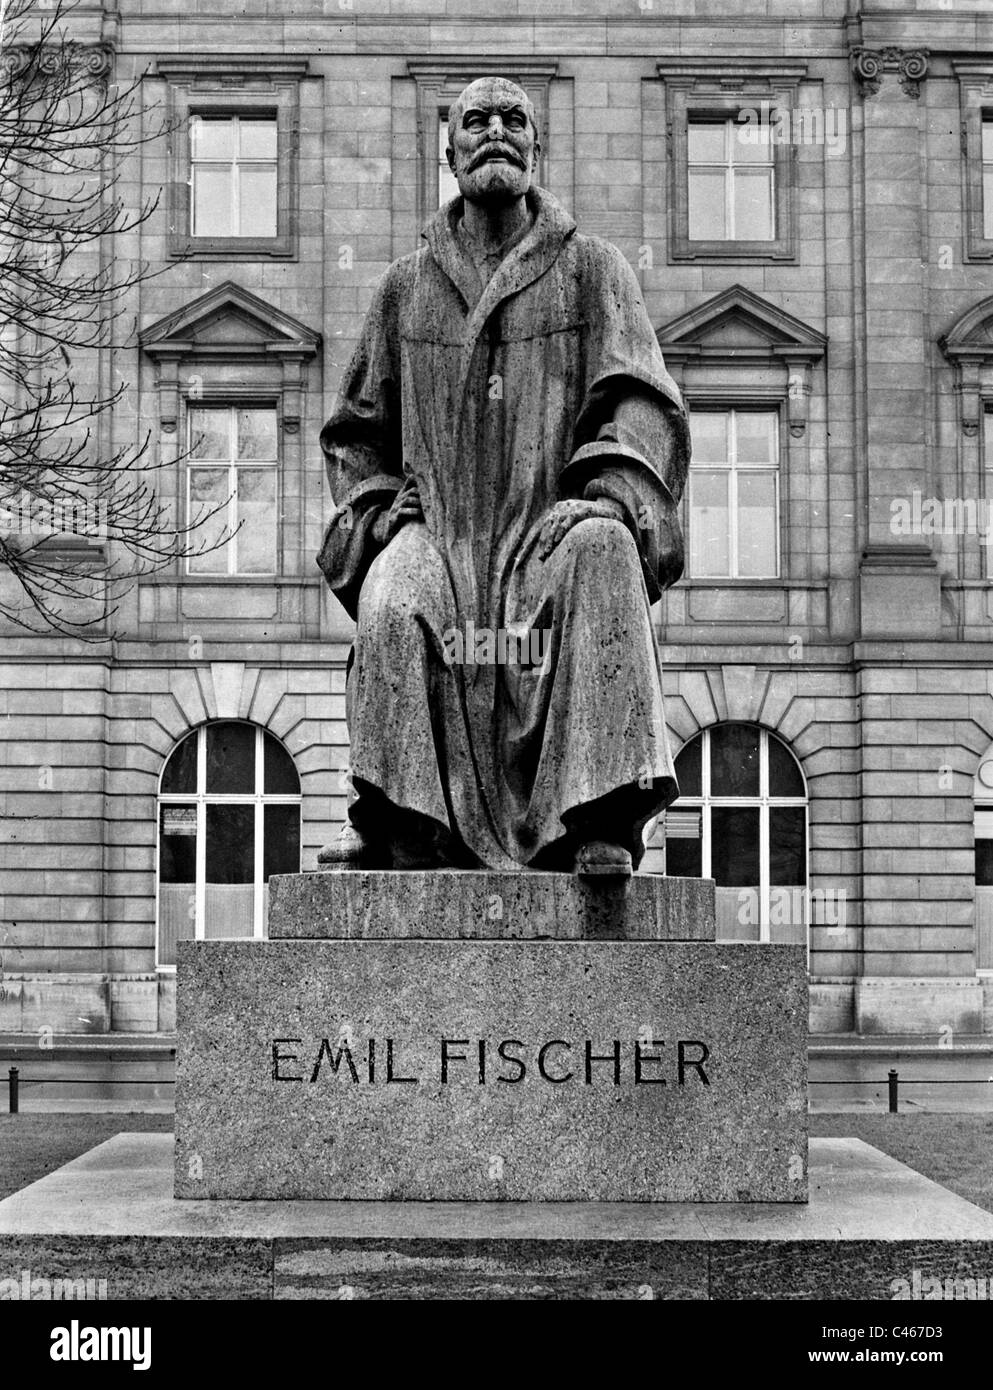 Emil fischer hi-res stock photography and images - Alamy